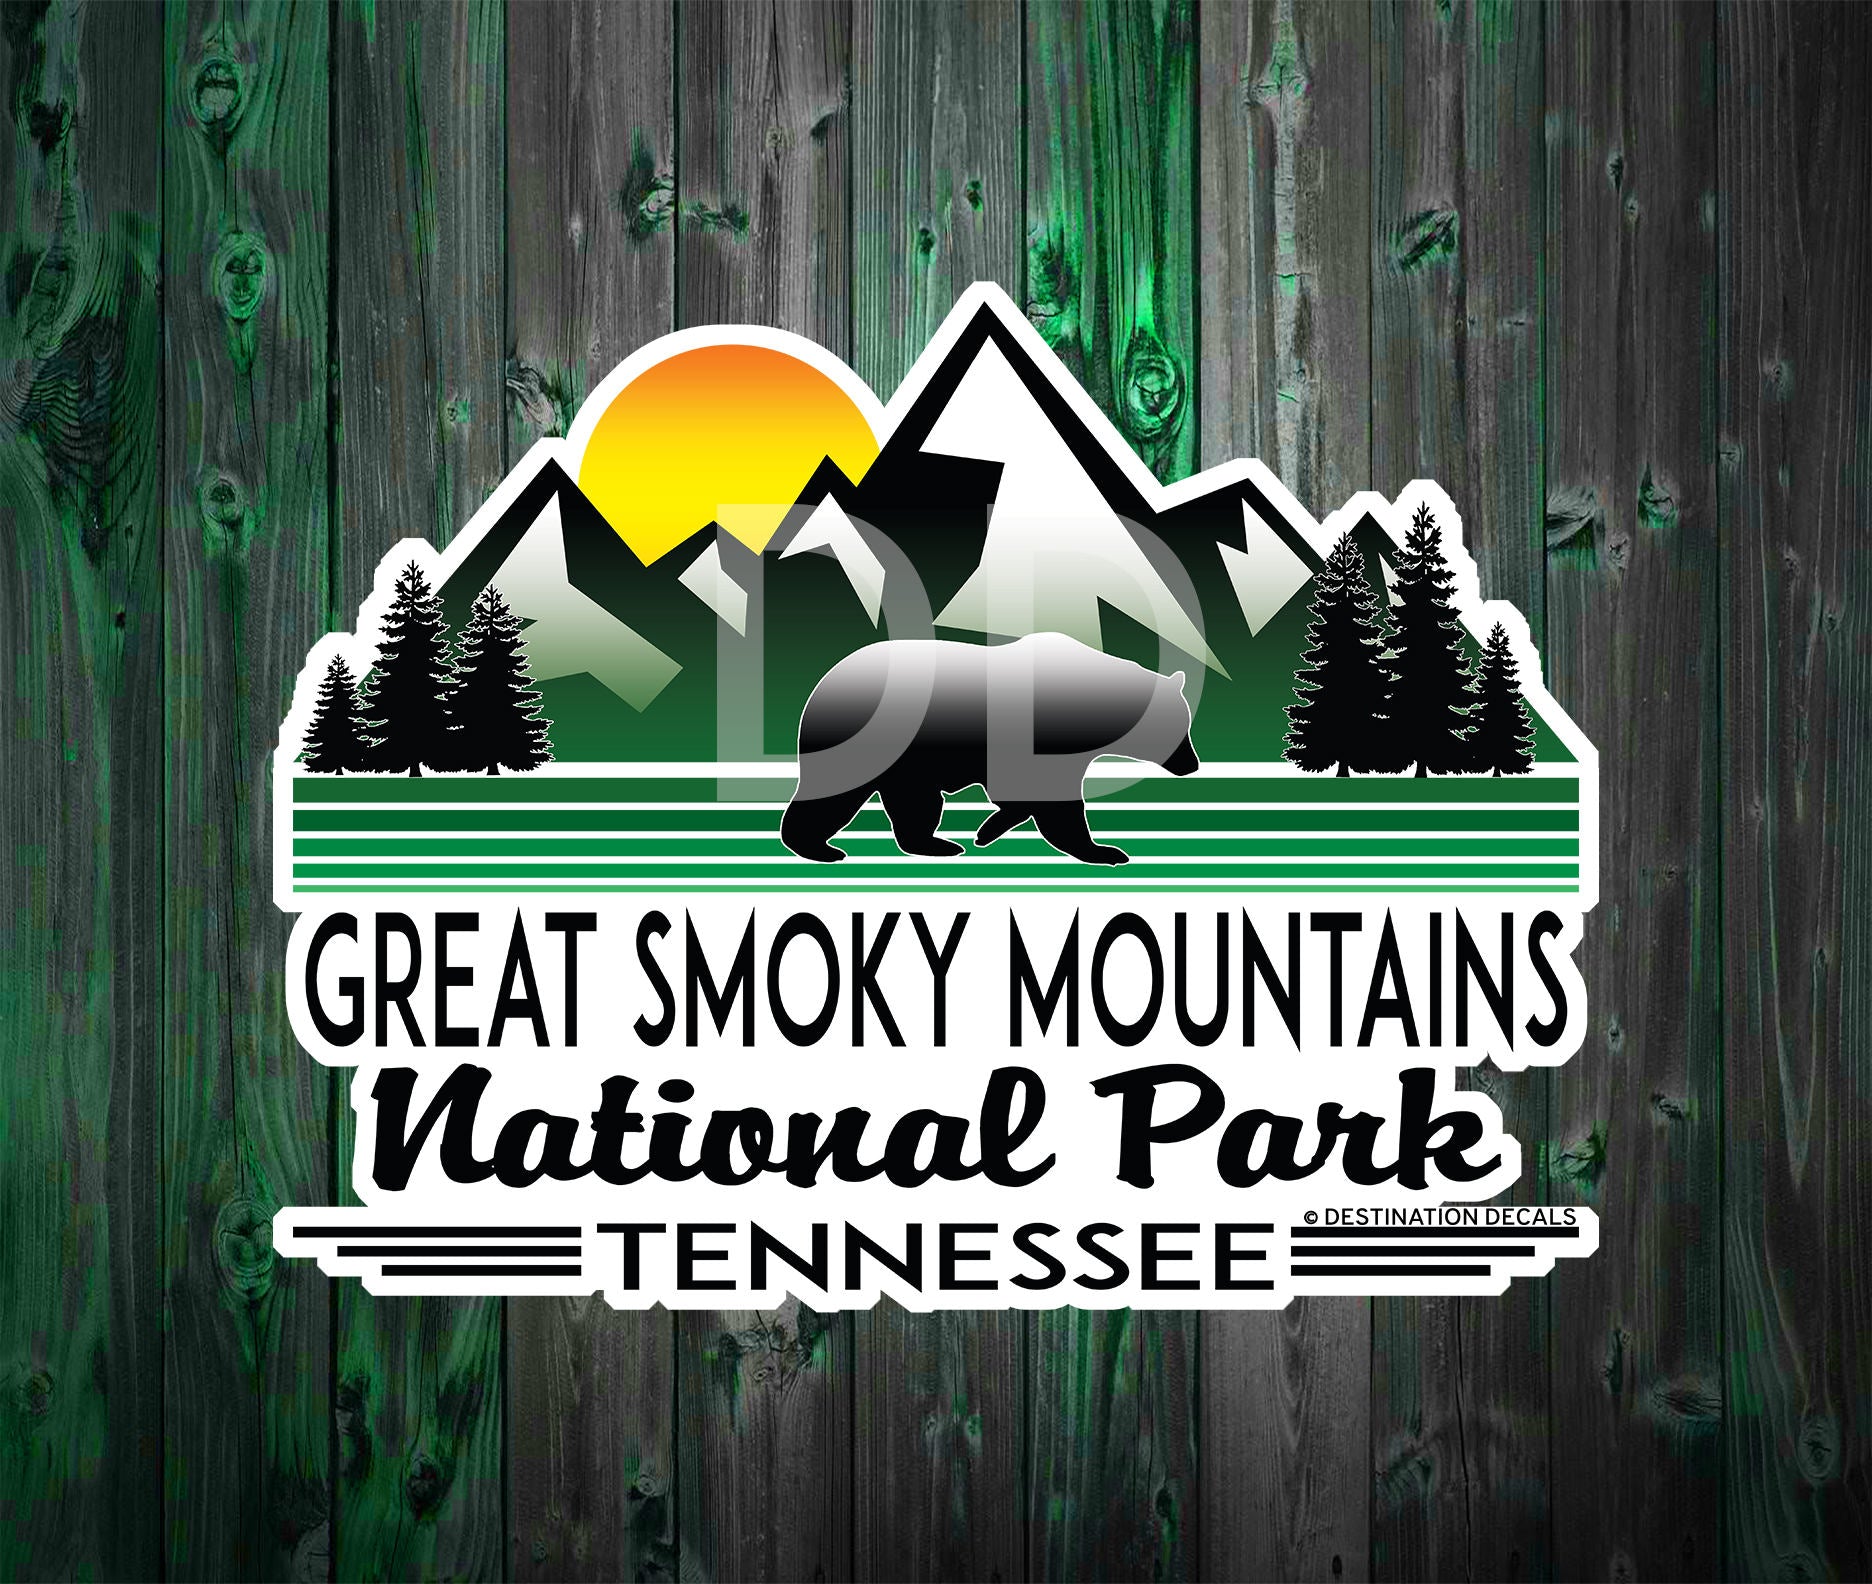 Great Smoky Mountains National Park Tennessee MOUNTAIN Hiking Sticker Decal 3.9" X 3"